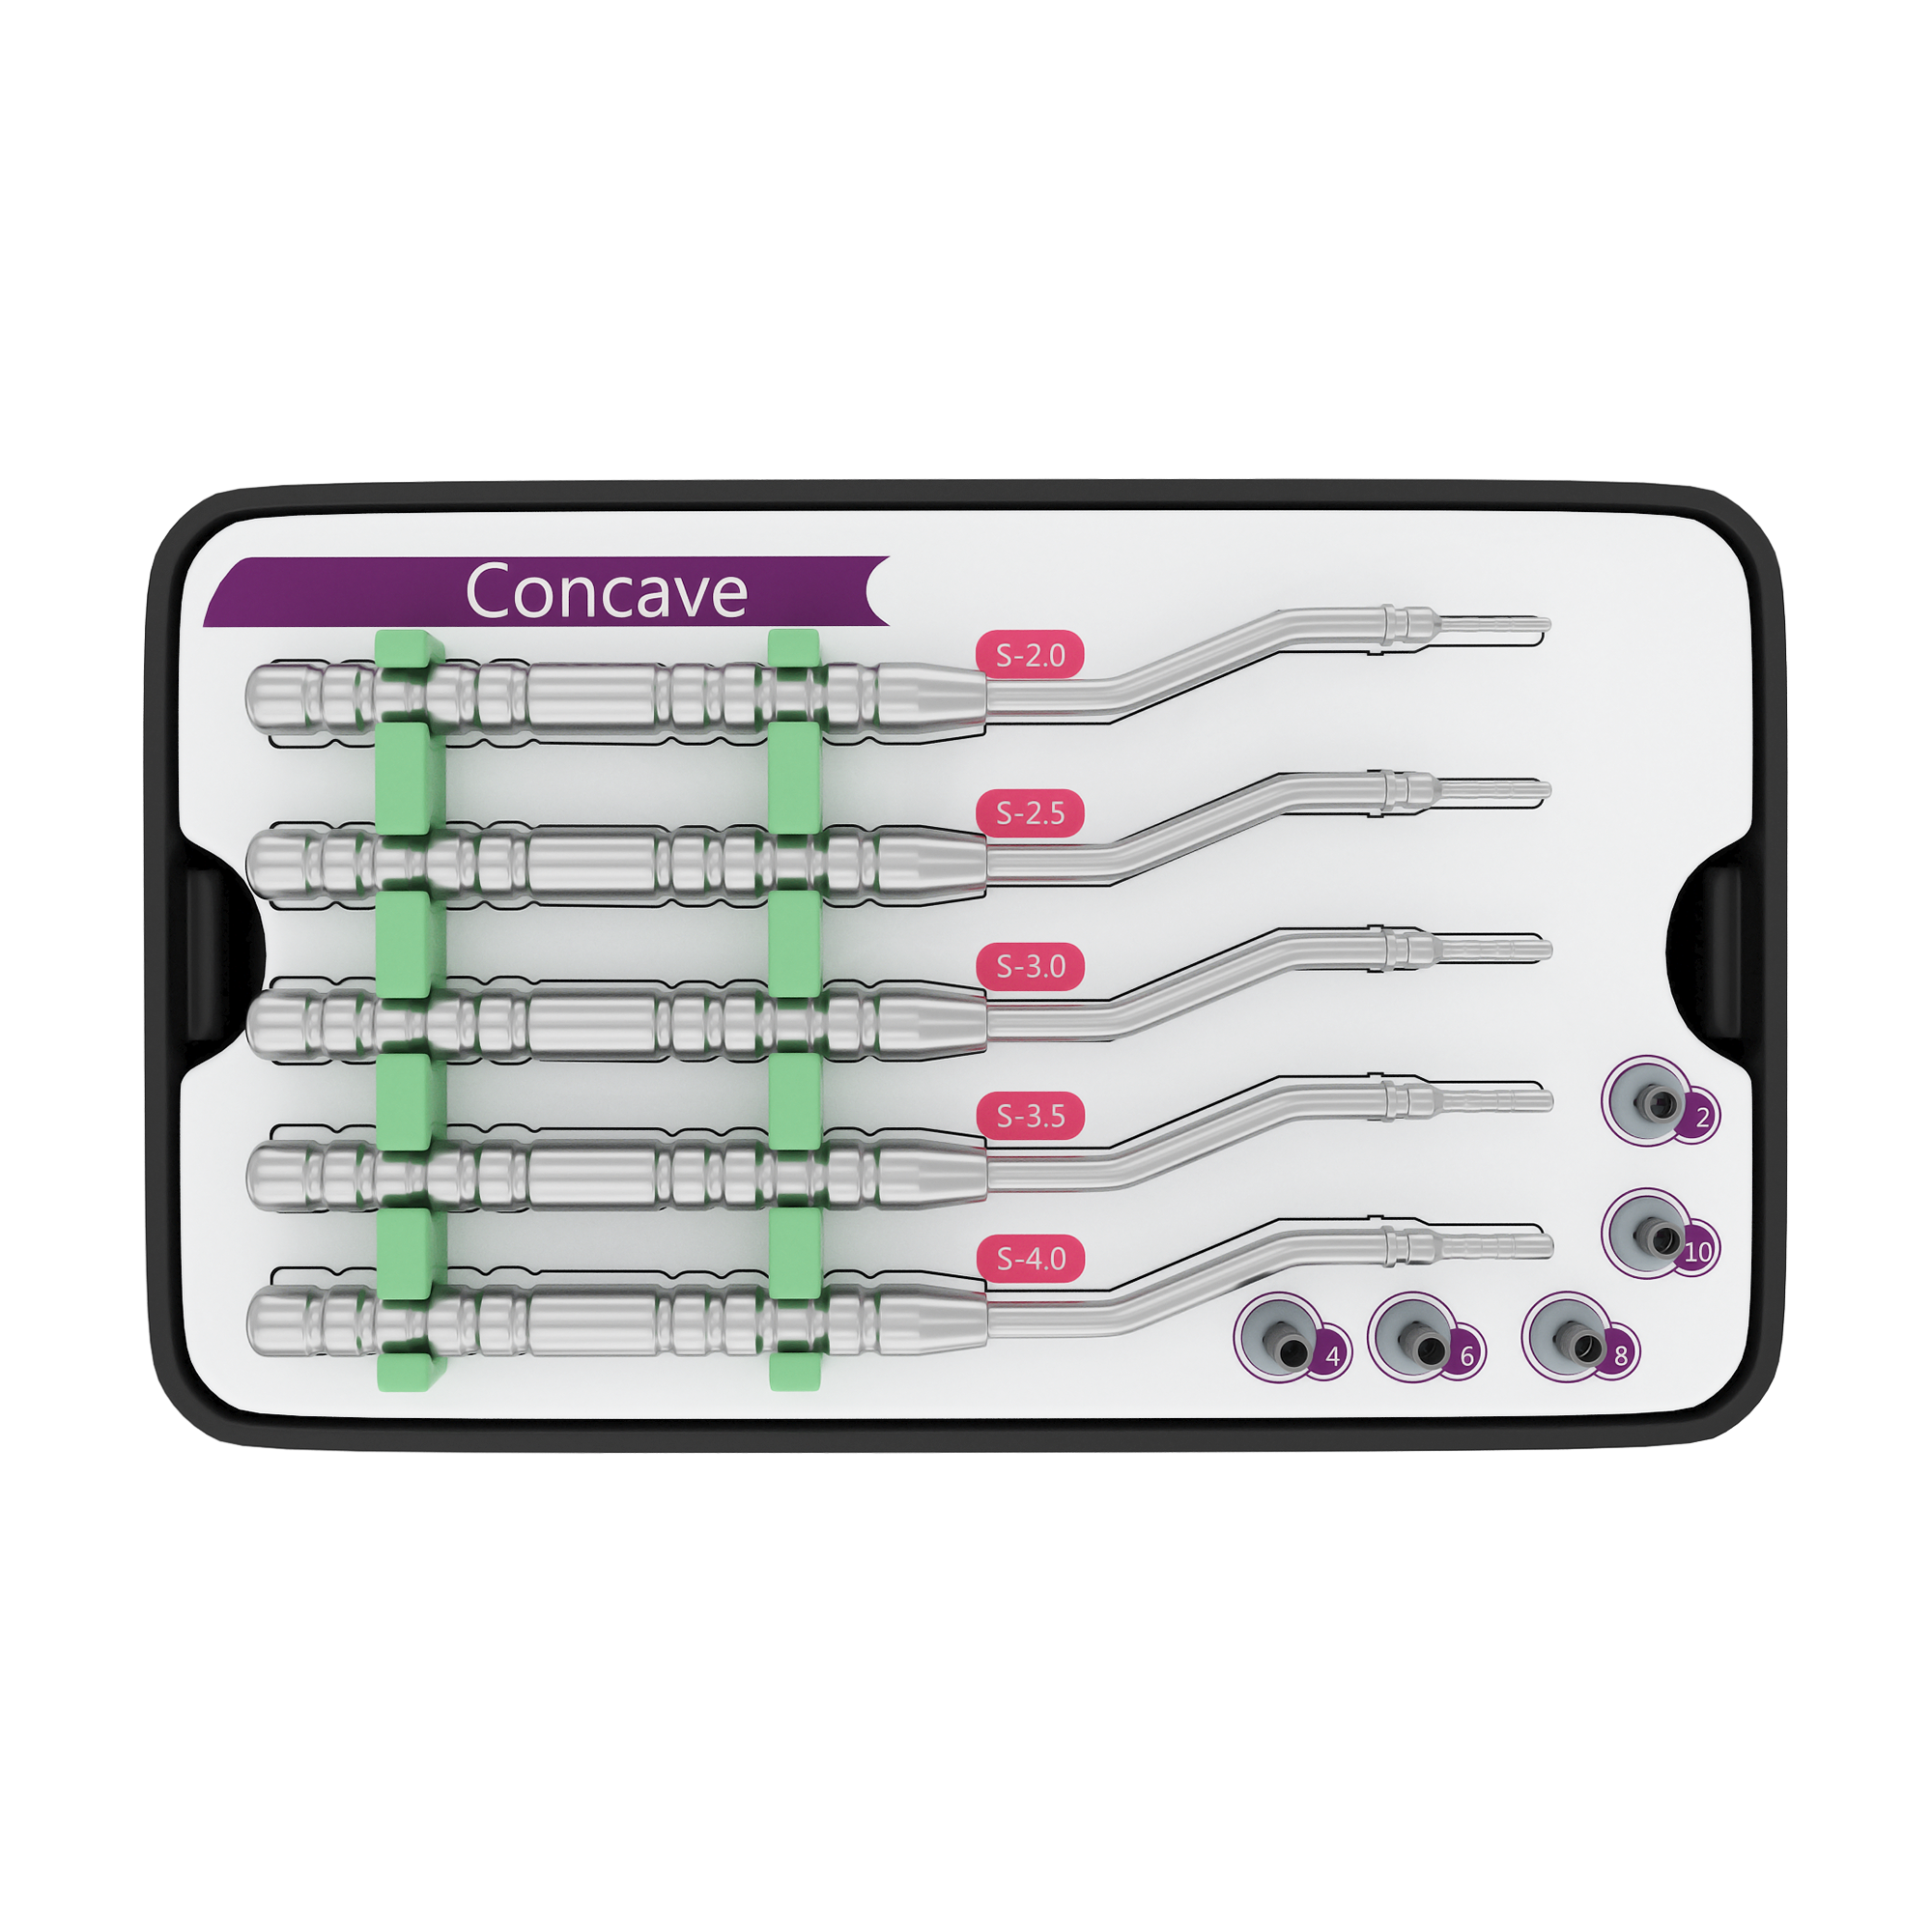 DSI Osteotome S-Kit For Bone Condensing and Sinus Lifting